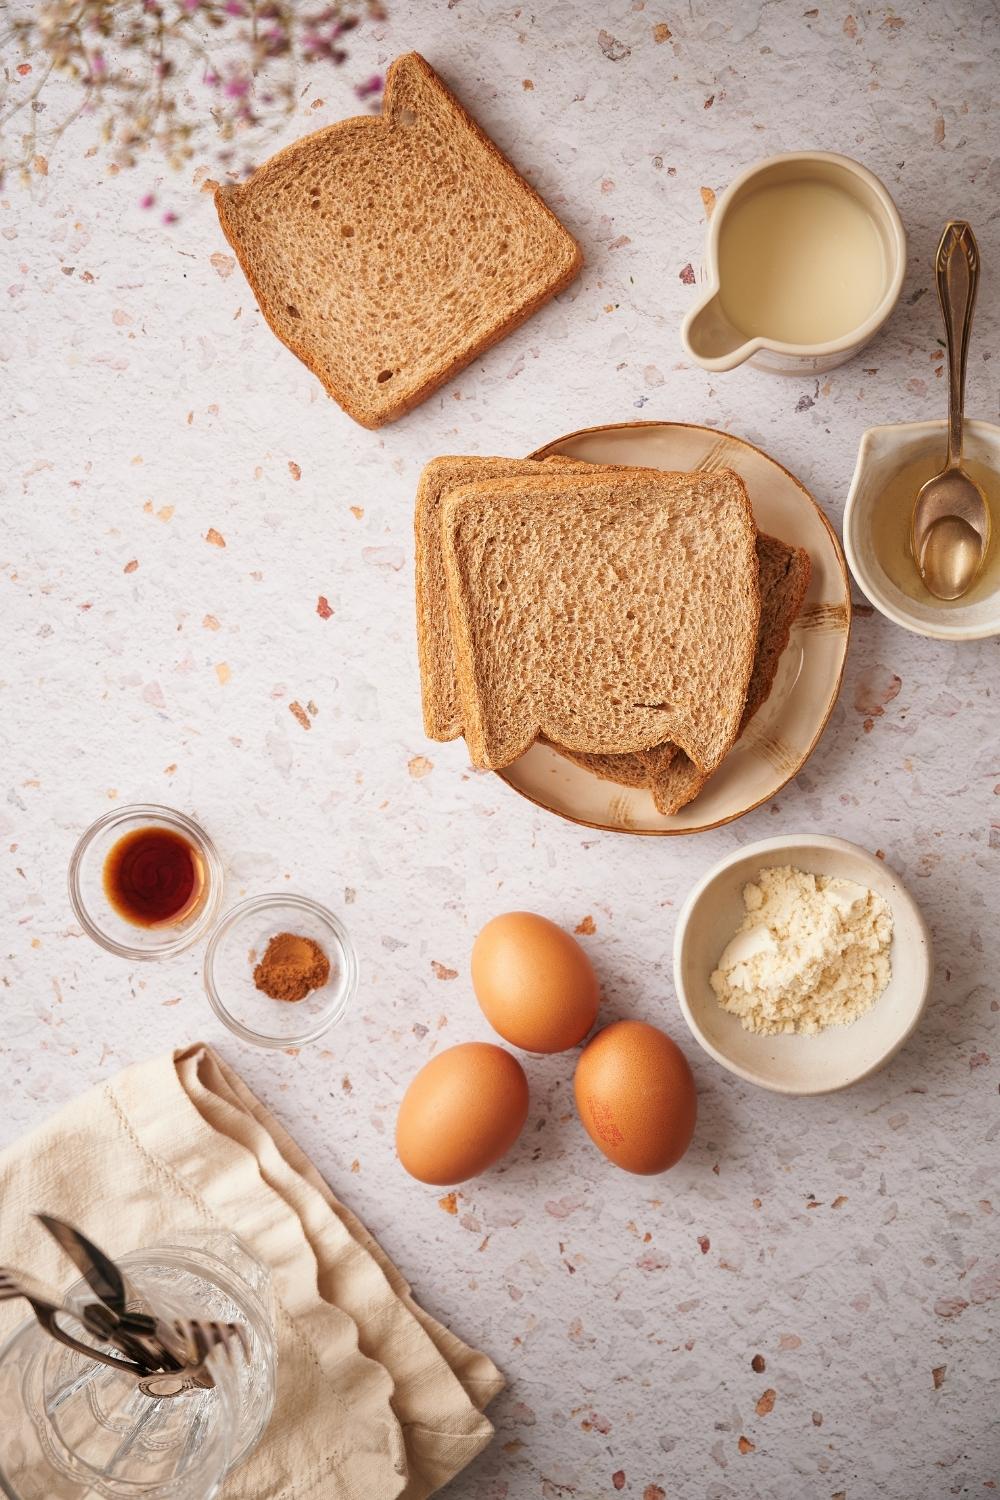 Clockwise from top: a slice of wheat bread, a small pitcher of almond milk, a small pitcher of syrup with a metal spoon, a plate with two wheat bread slices, a small bowl of protein powder, three eggs, and two small glass bowls of cinnamon and vanilla extract.